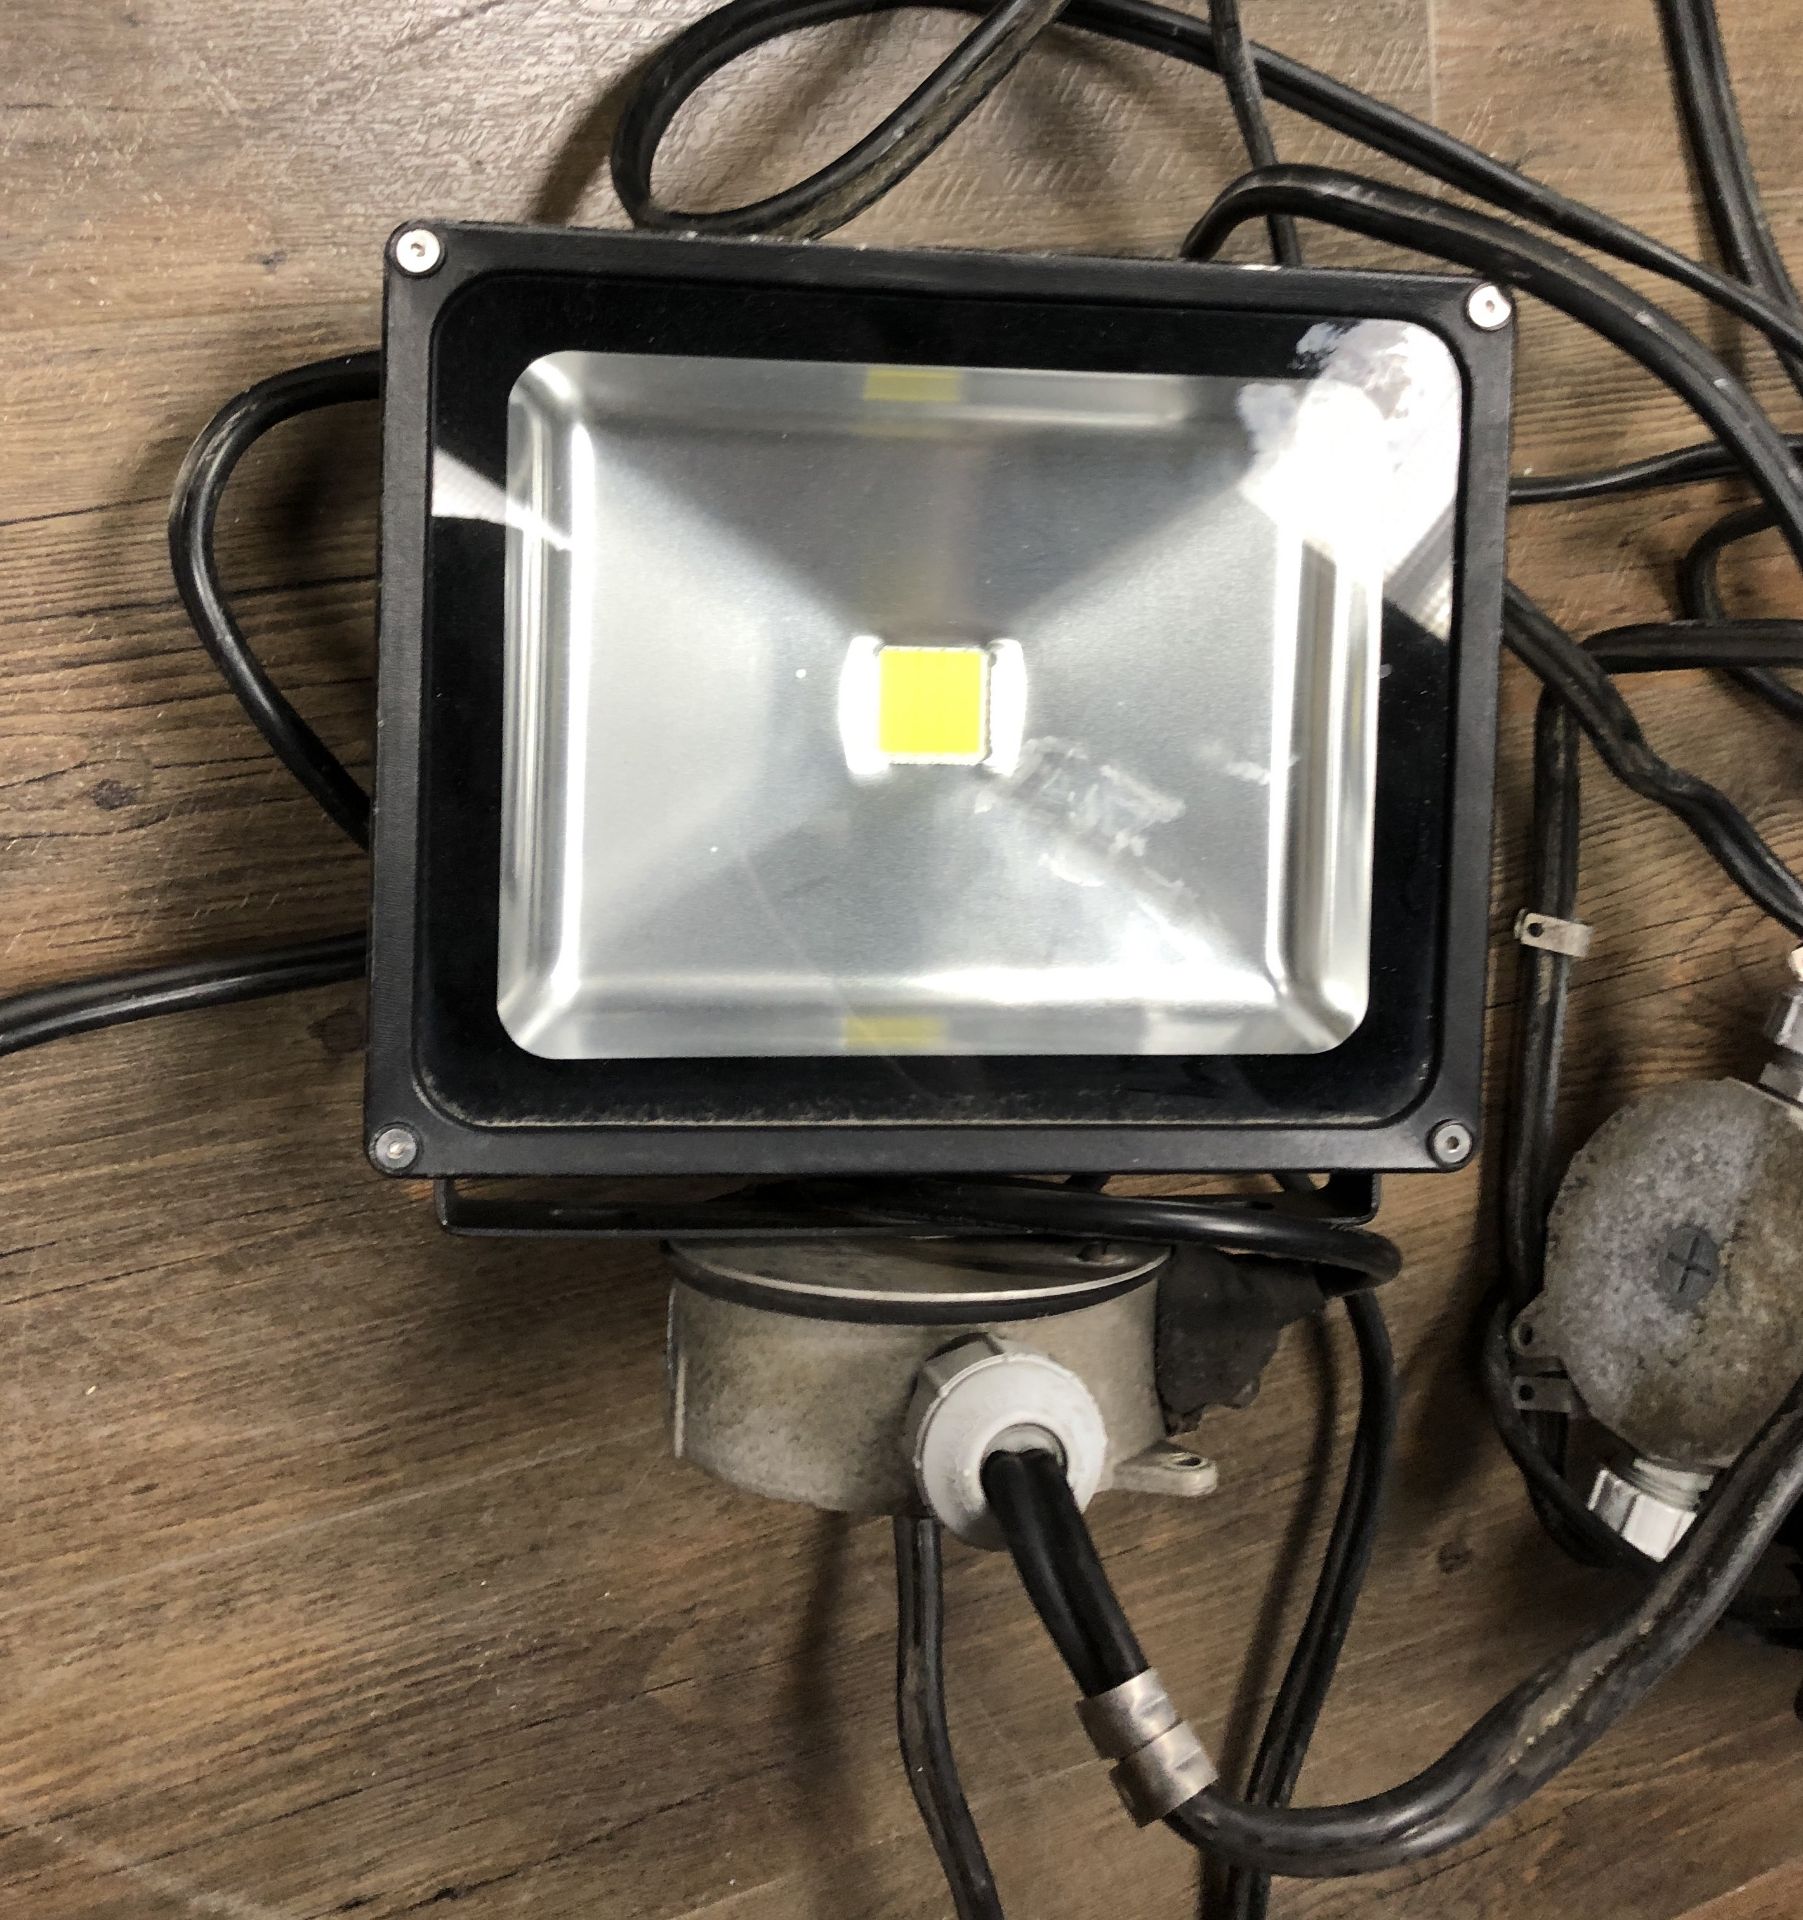 7 UL LED FLOOD LIGHTS WITH WIRES MODEL TL-FLA301-02 30W - Image 2 of 3